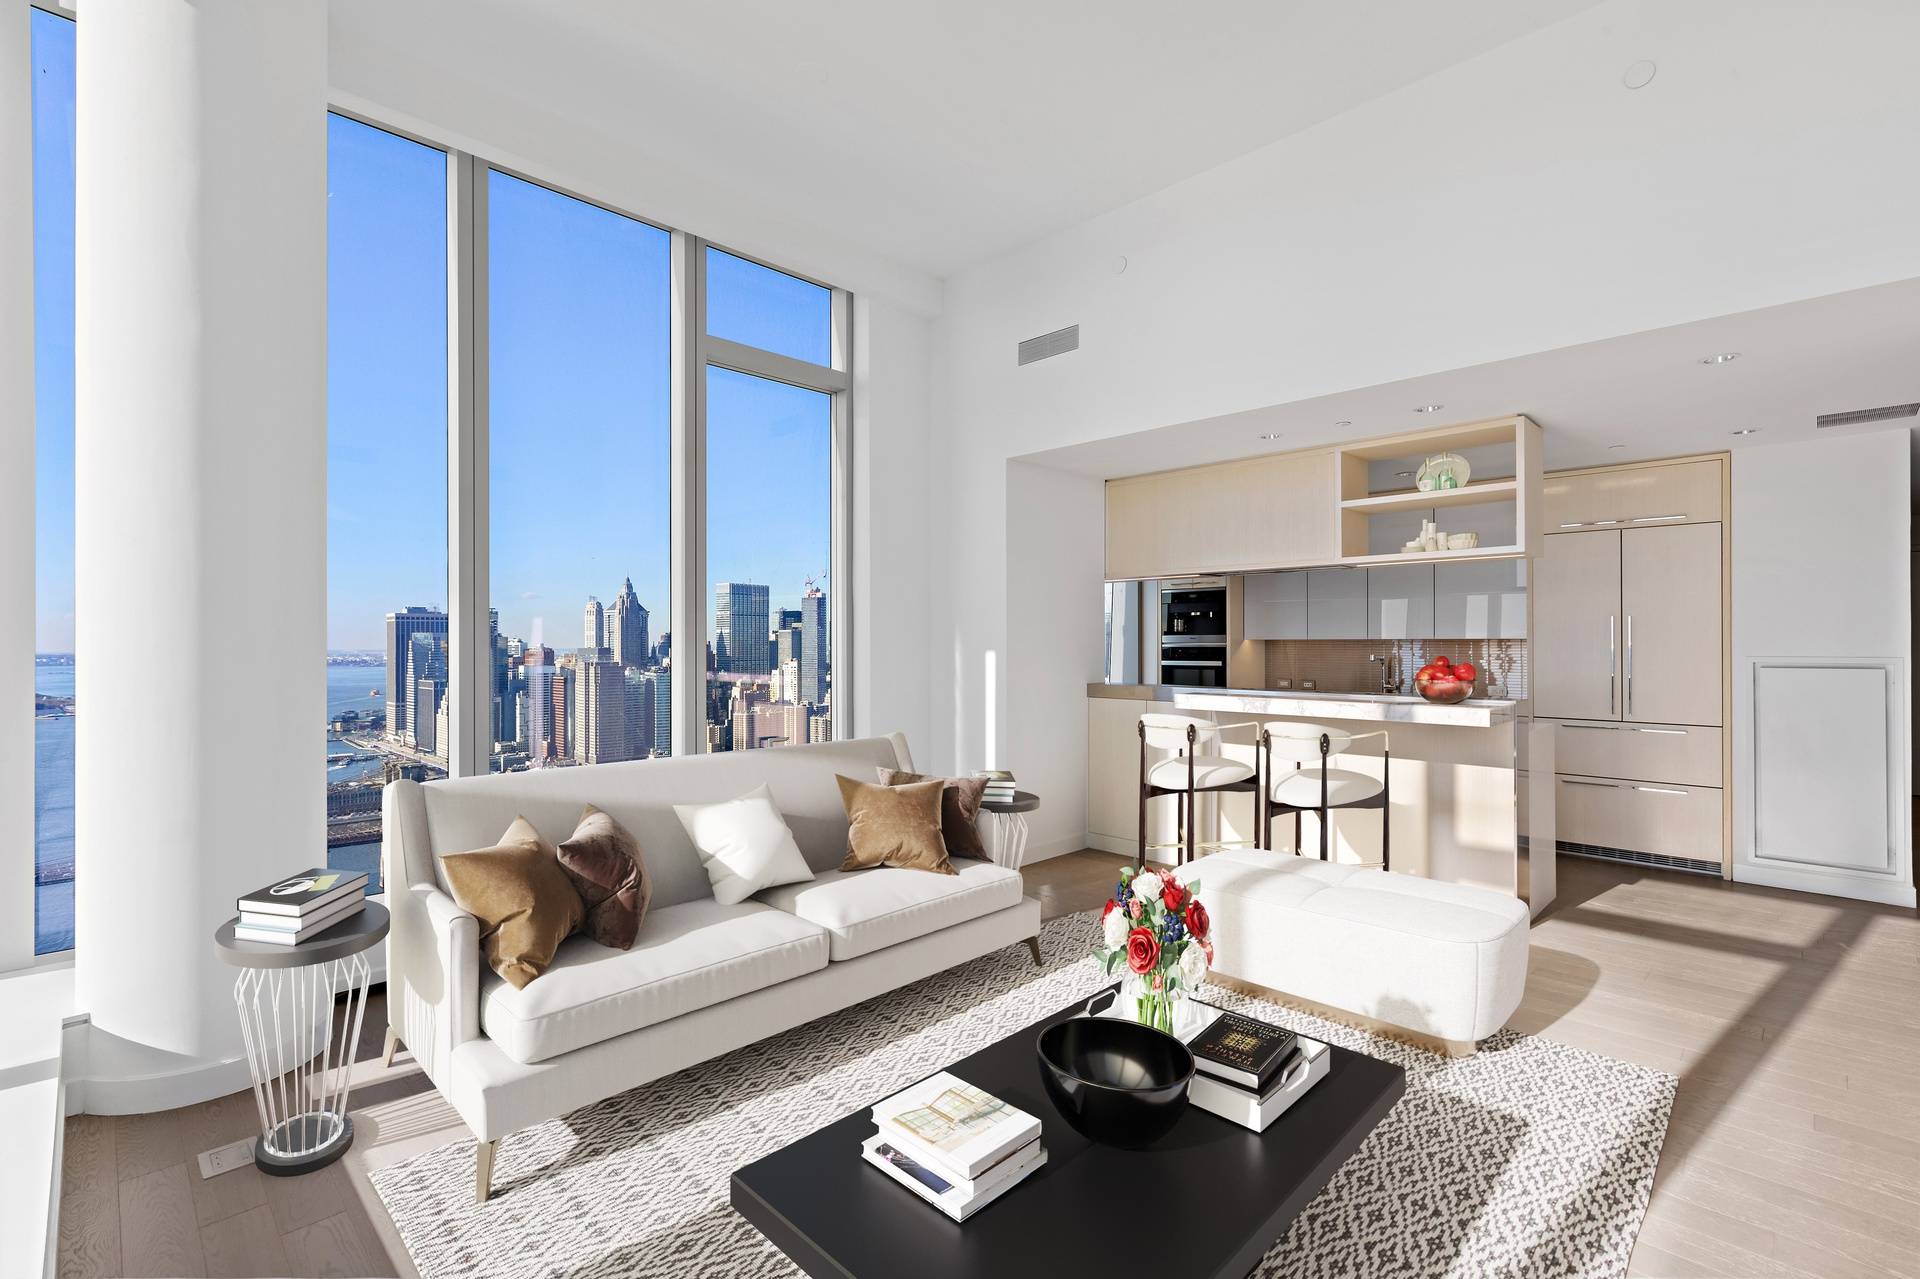 3 Bedroom 3 Bathroom Residence w/ Skyline Views at the Luxurious One Manhattan Square | LES